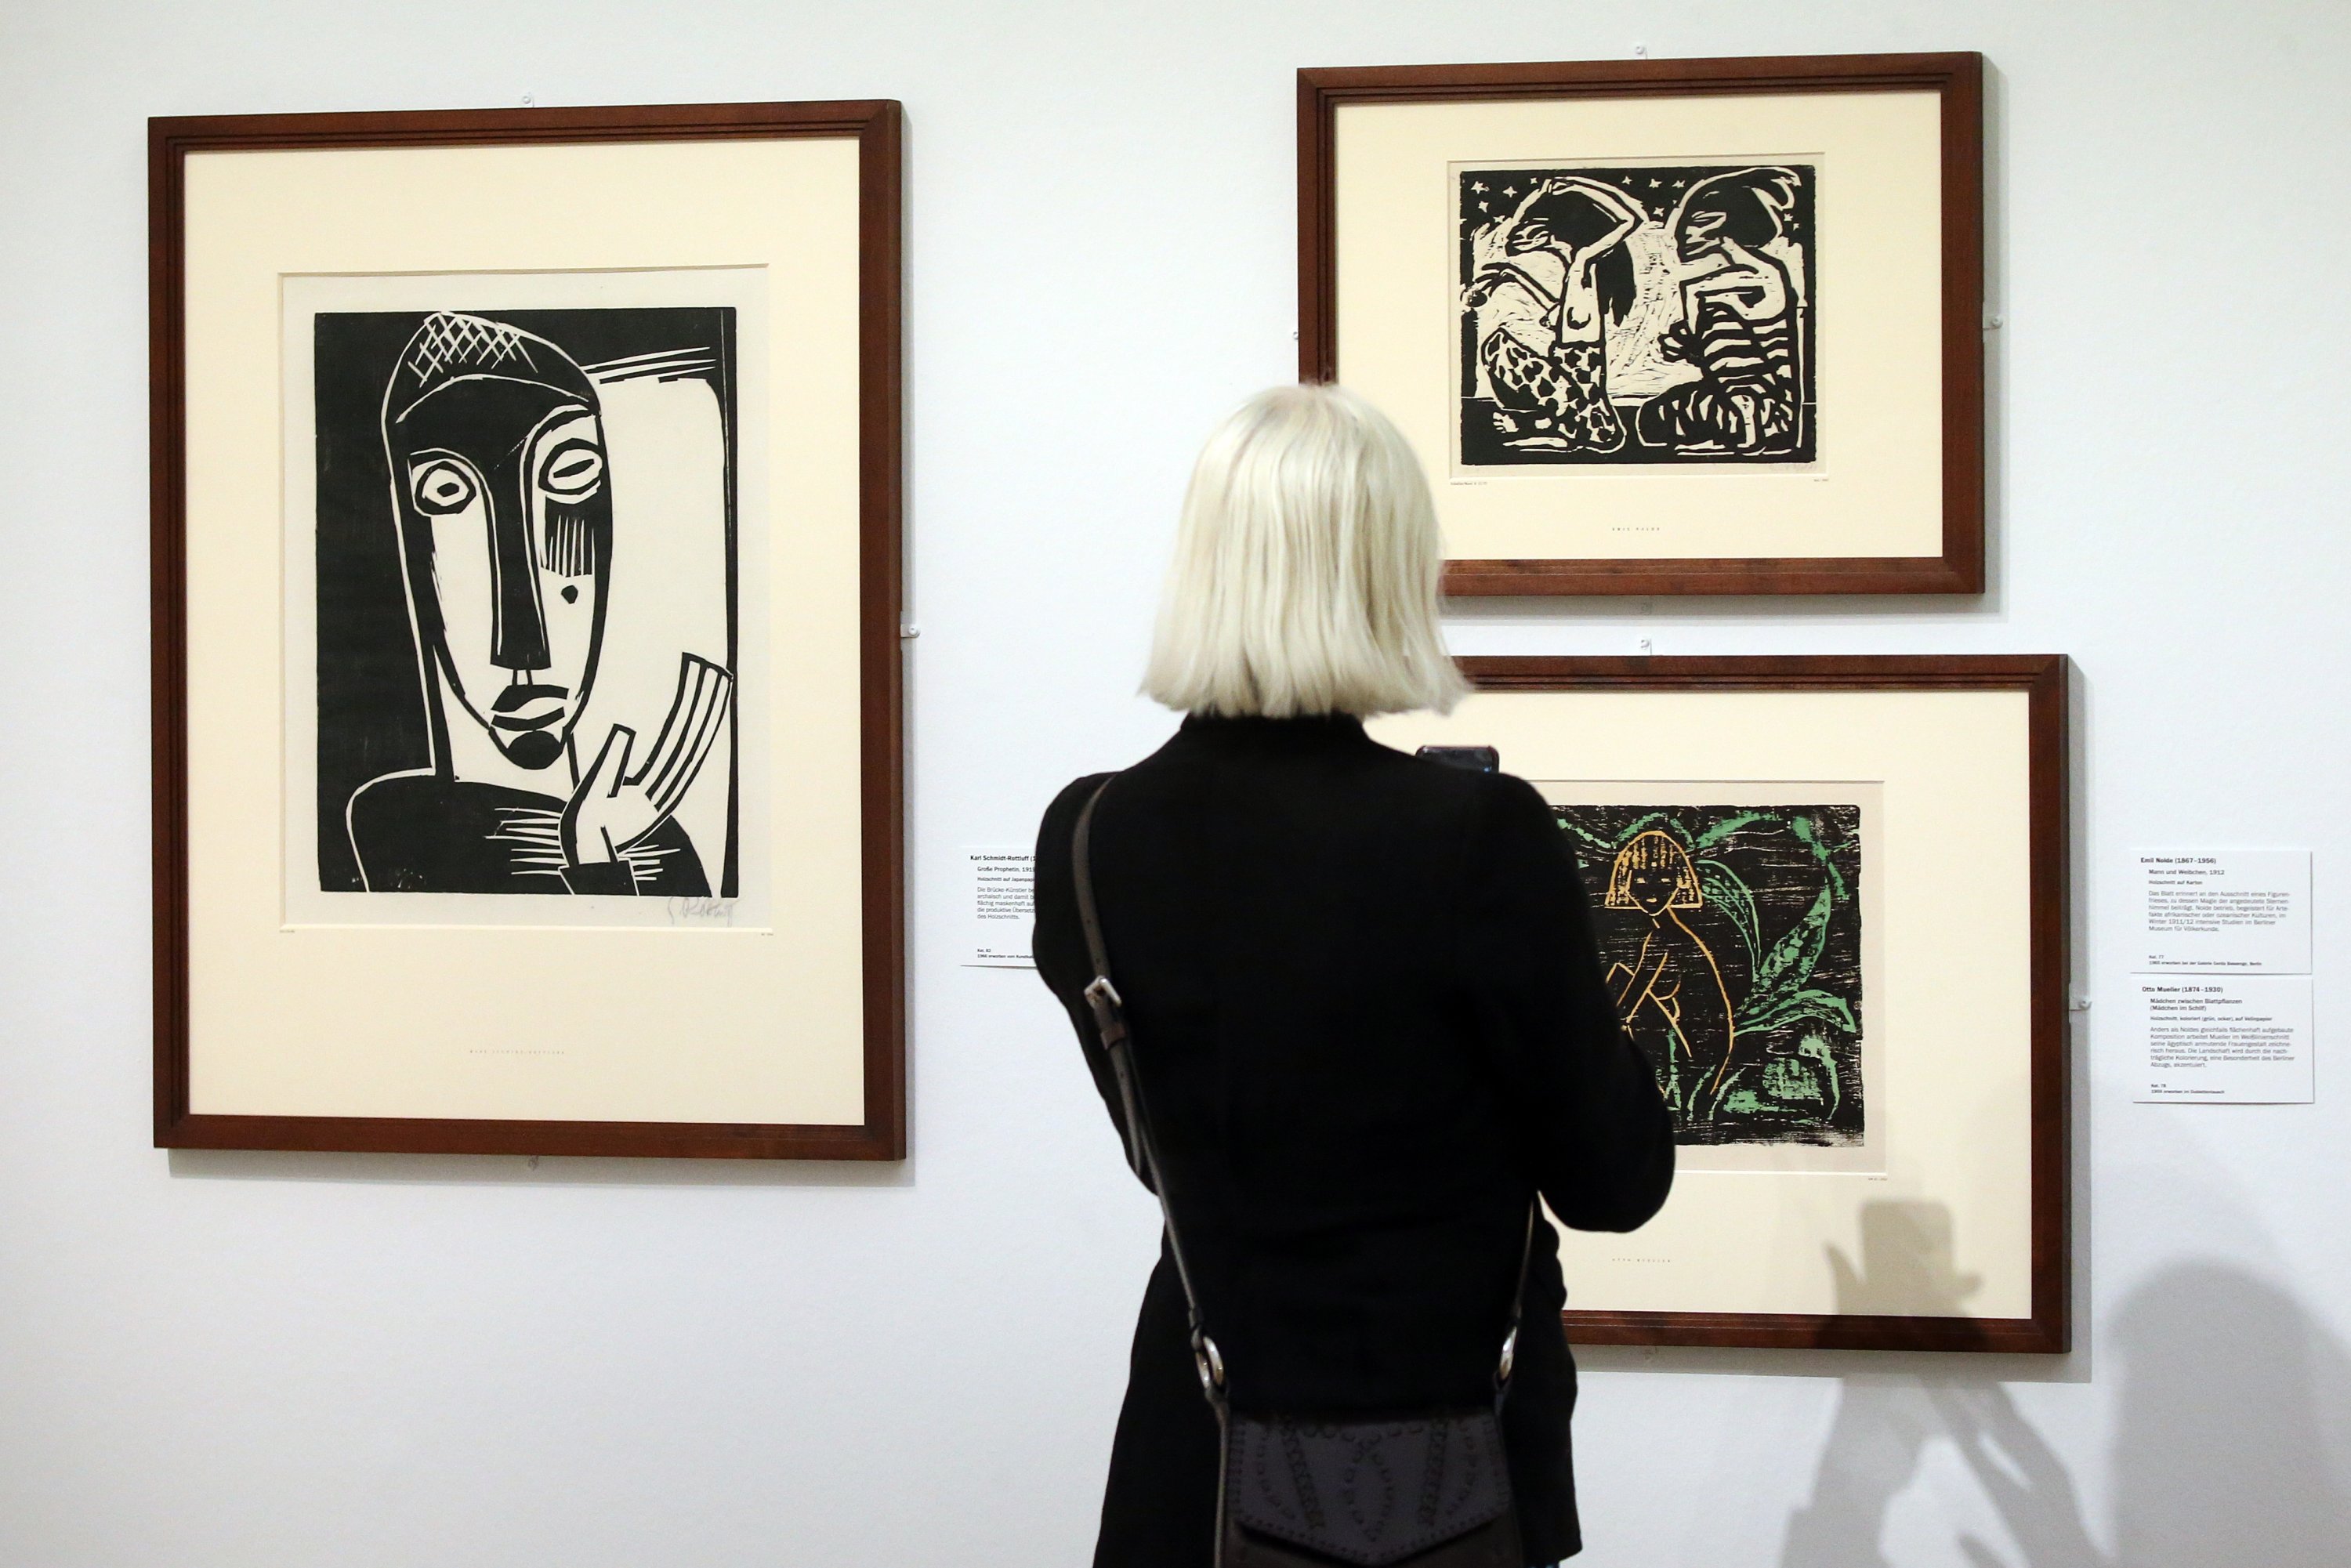 Woodcuts by artist Karl Schmidt-Rottluff from 1919 on display at the show 